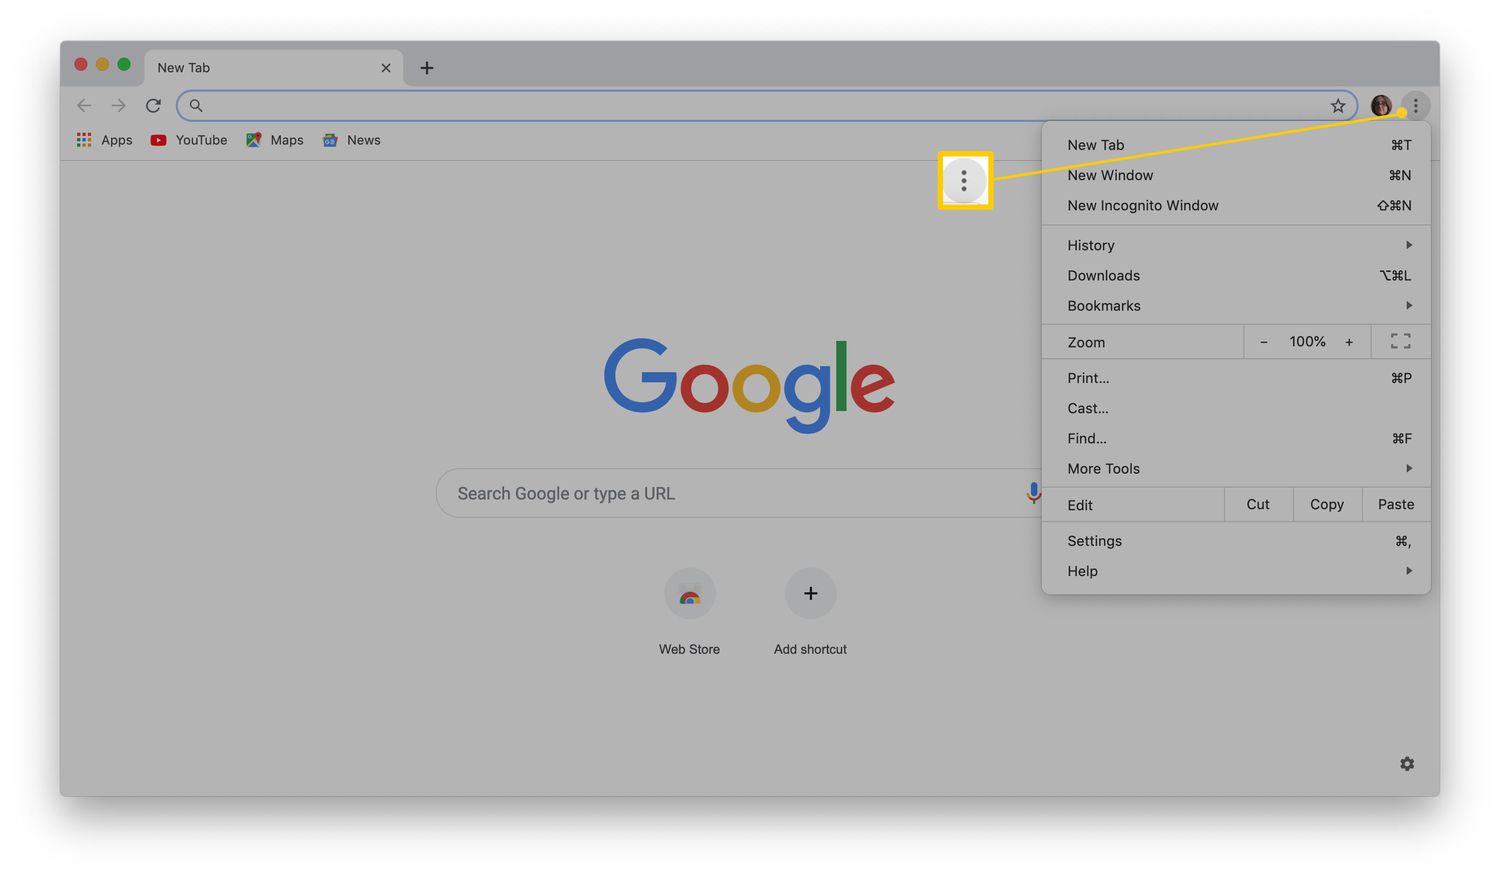 How To Make Google The Default Search Engine In Chrome